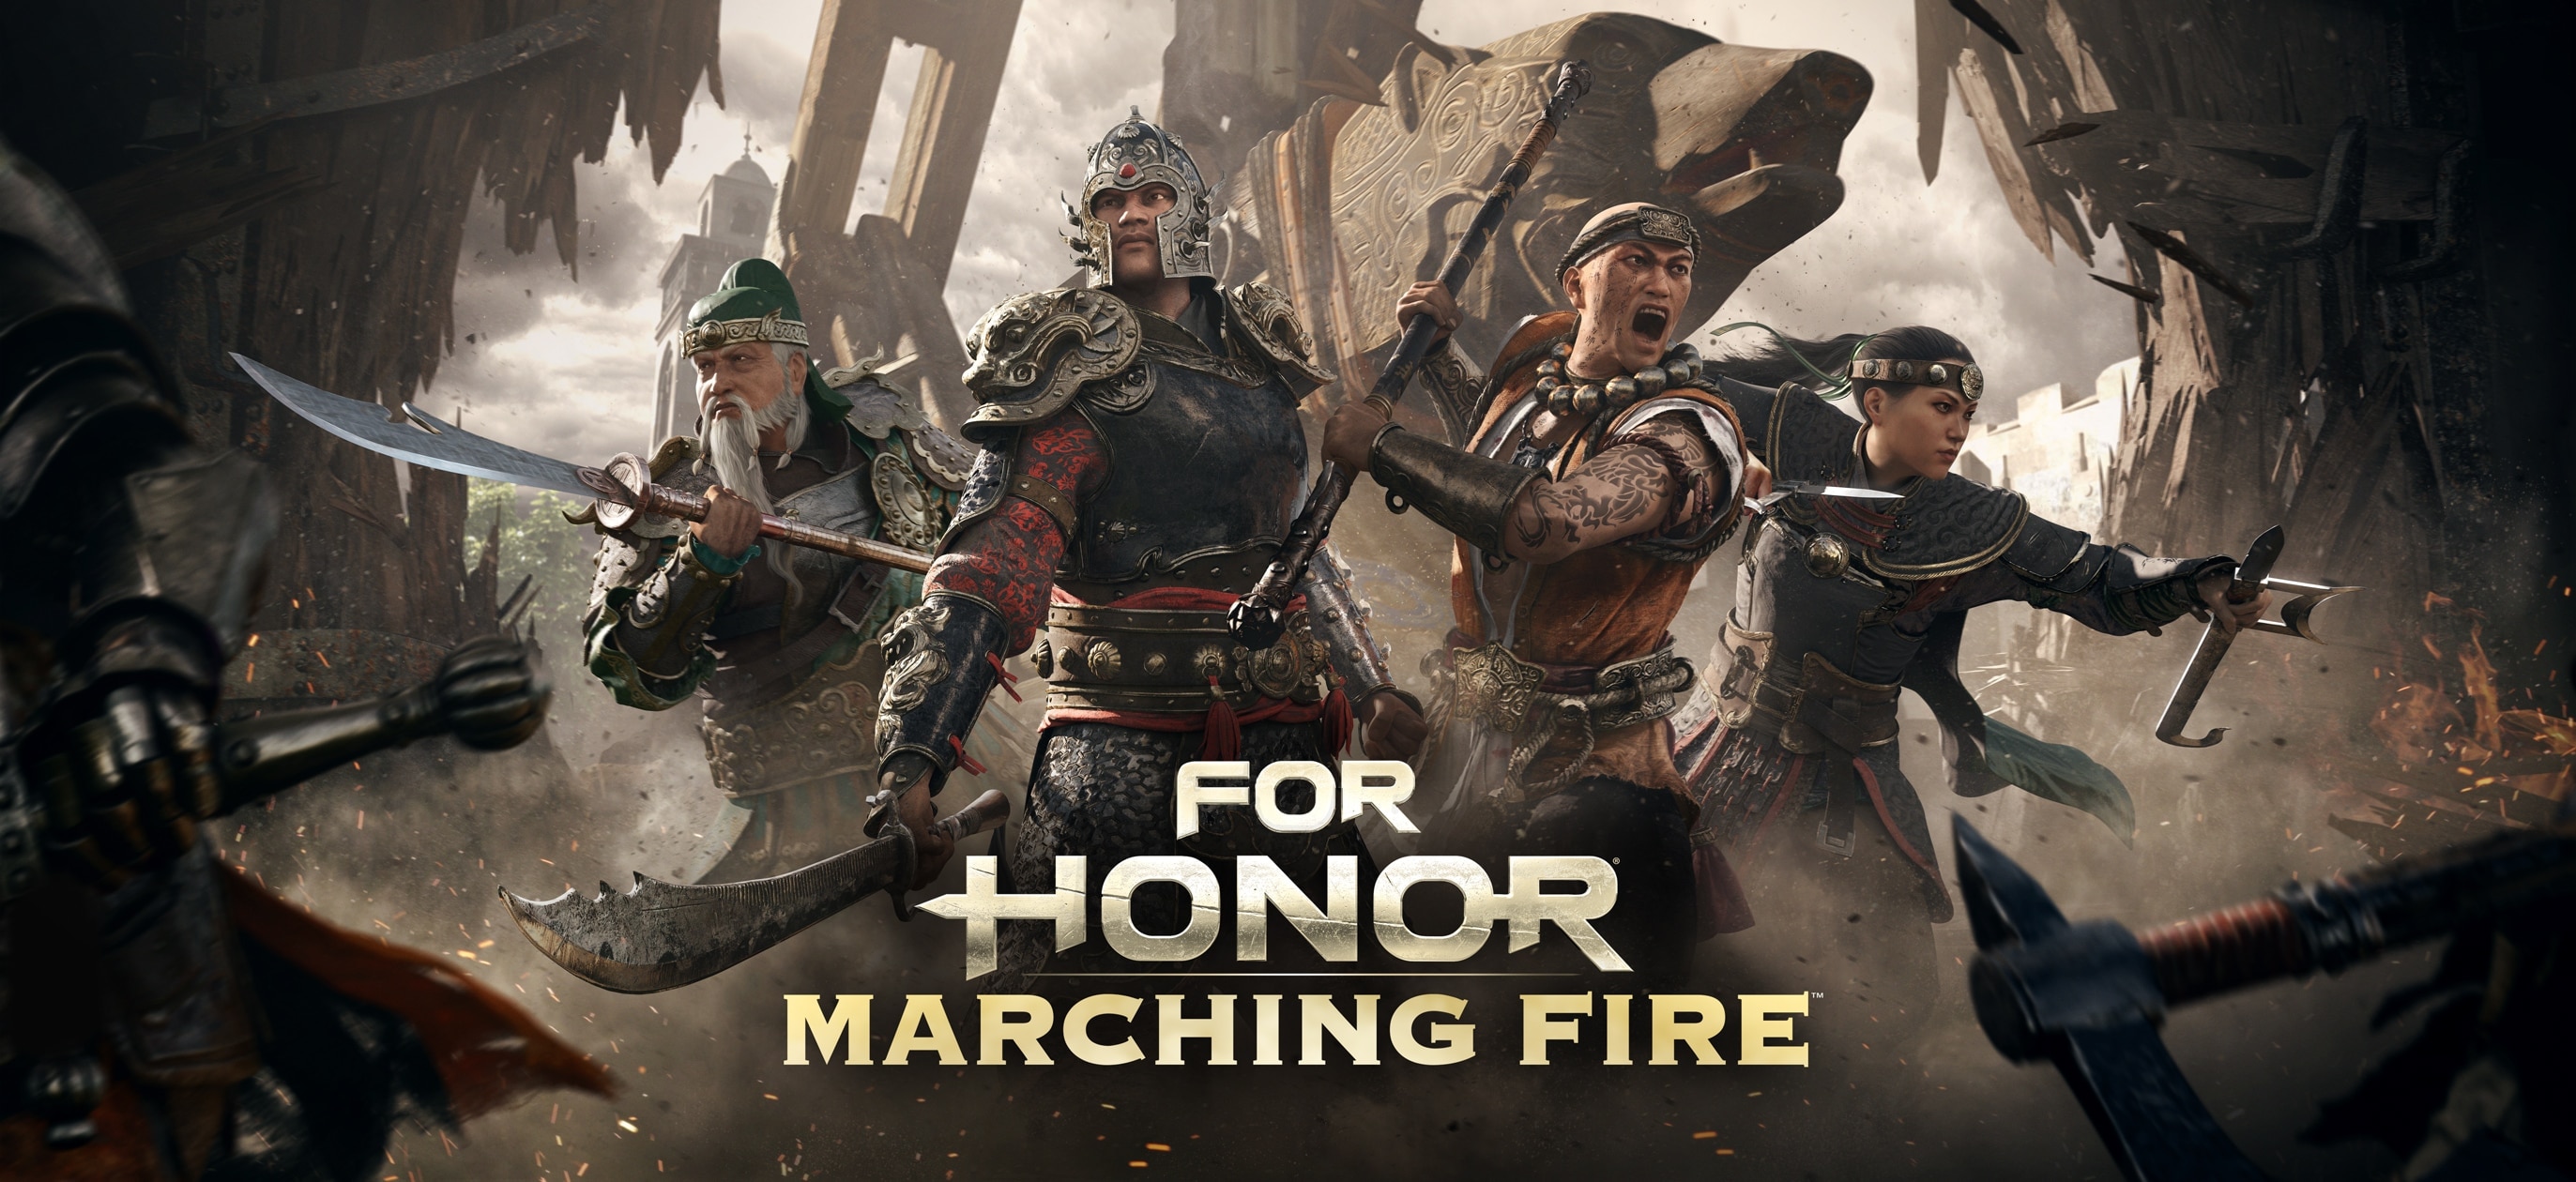 For Honor: Marching Fire | Ubisoft (BR)